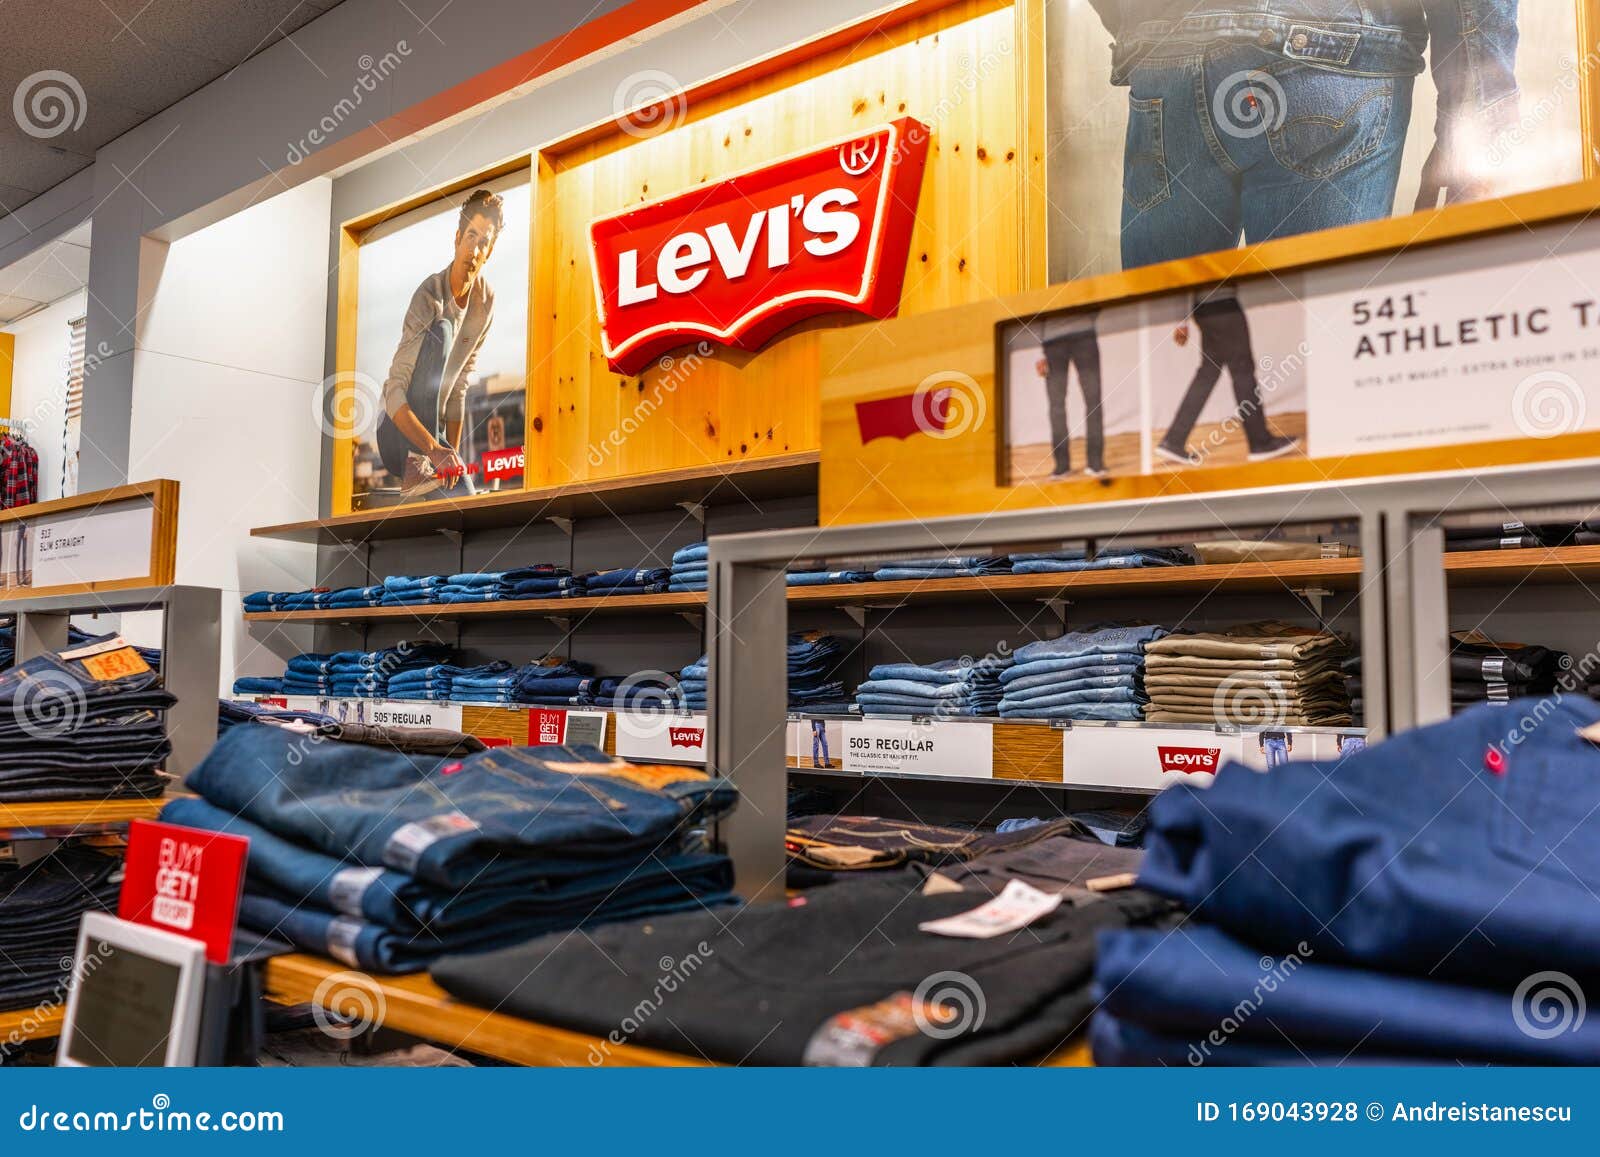 Jan 9, 2020 Mountain View / CA / USA - Levi`s Section, with Different Types  of Jeans on Display, Located in a Department Store Editorial Stock Photo -  Image of famous, casual: 169043928